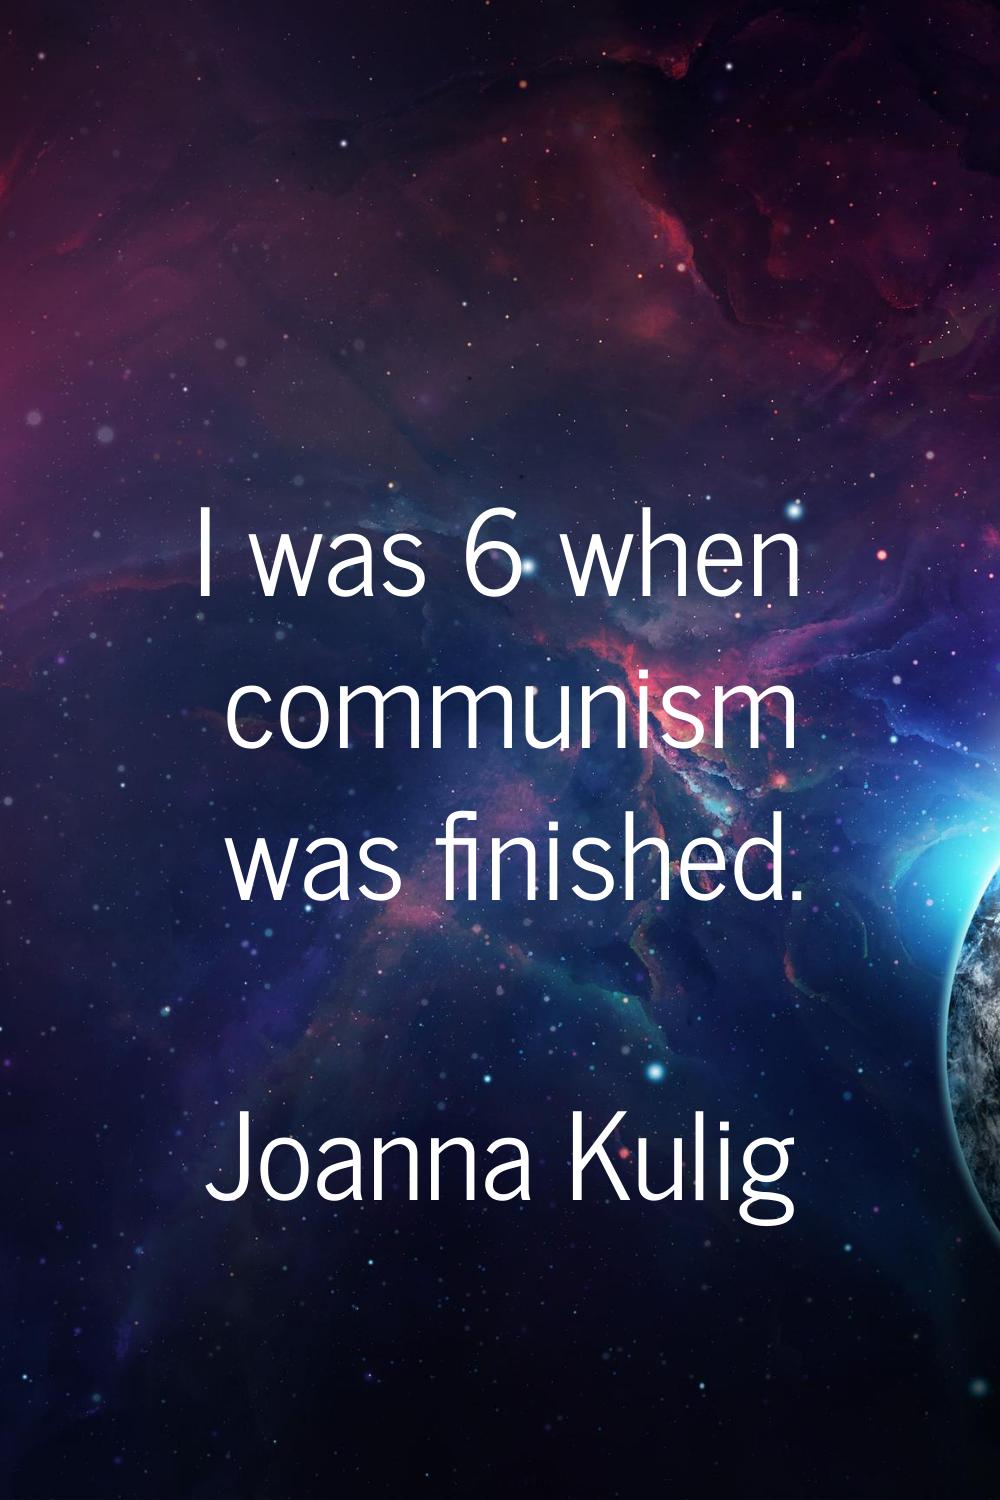 I was 6 when communism was finished.